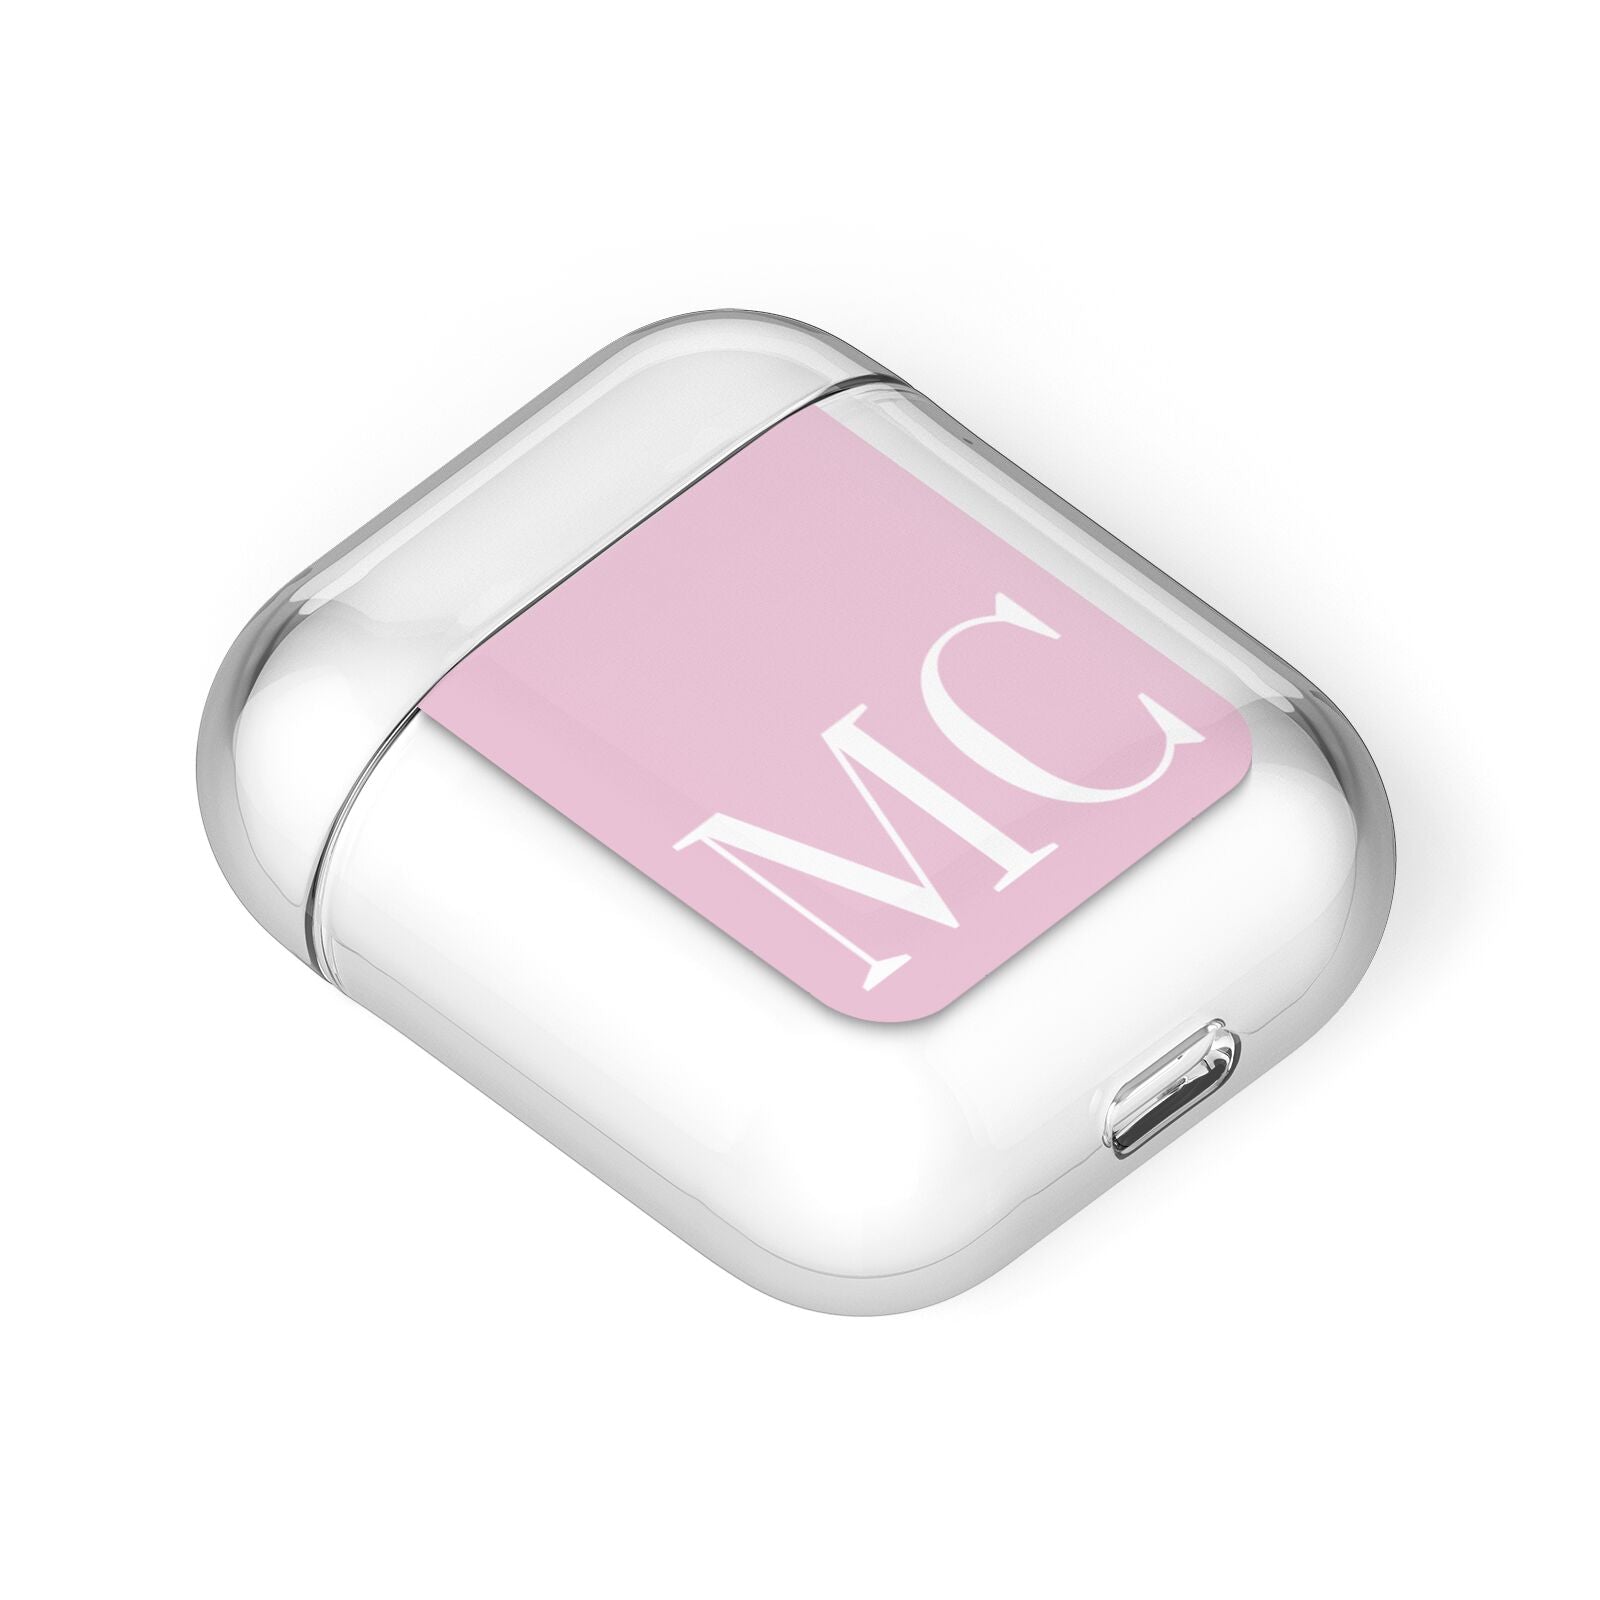 Initials Personalised 2 AirPods Case Laid Flat